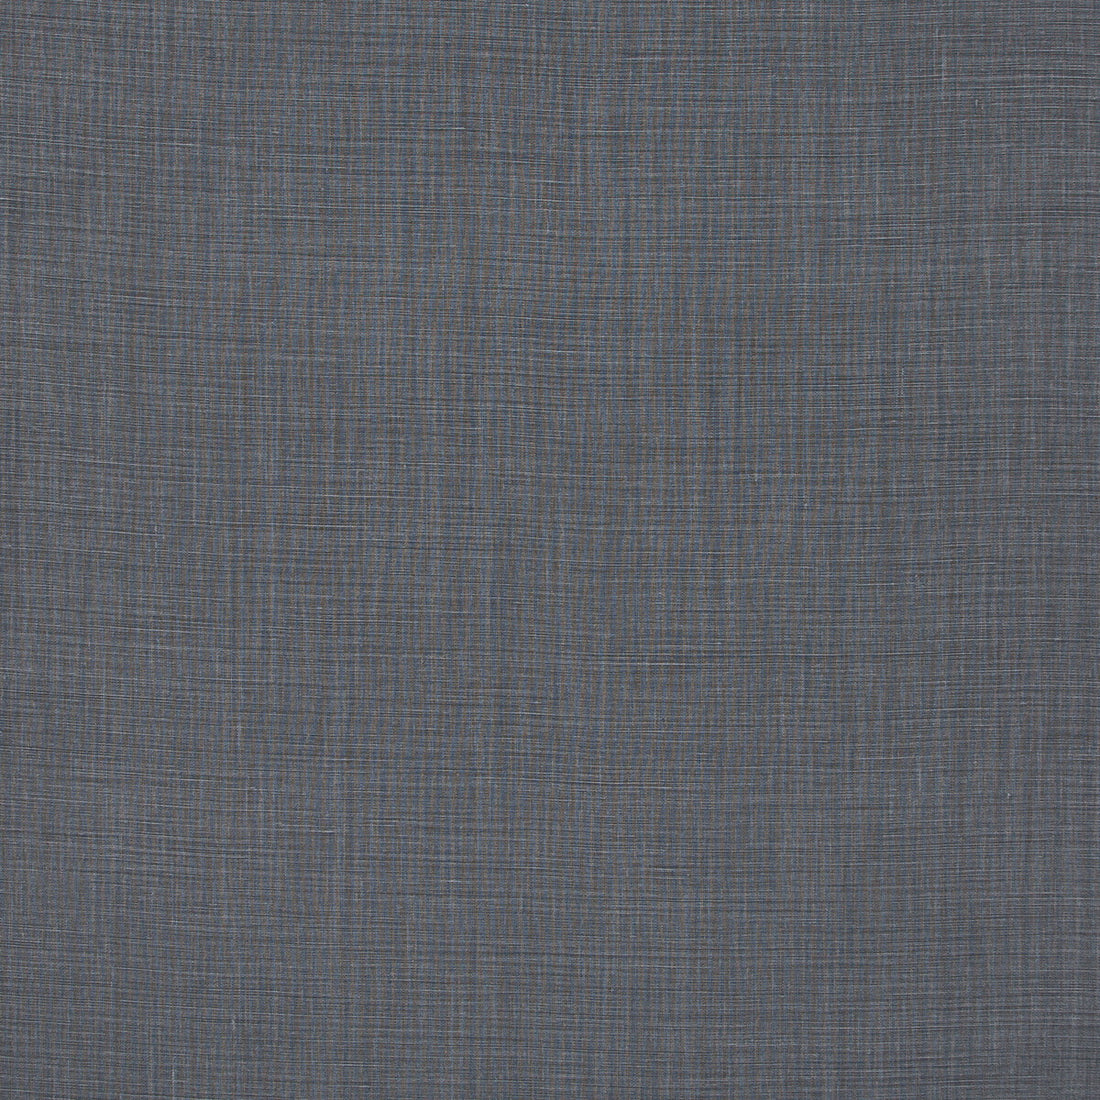 Baker House Linen fabric in charcoal color - pattern BF10961.985.0 - by G P &amp; J Baker in the Baker House Linens collection